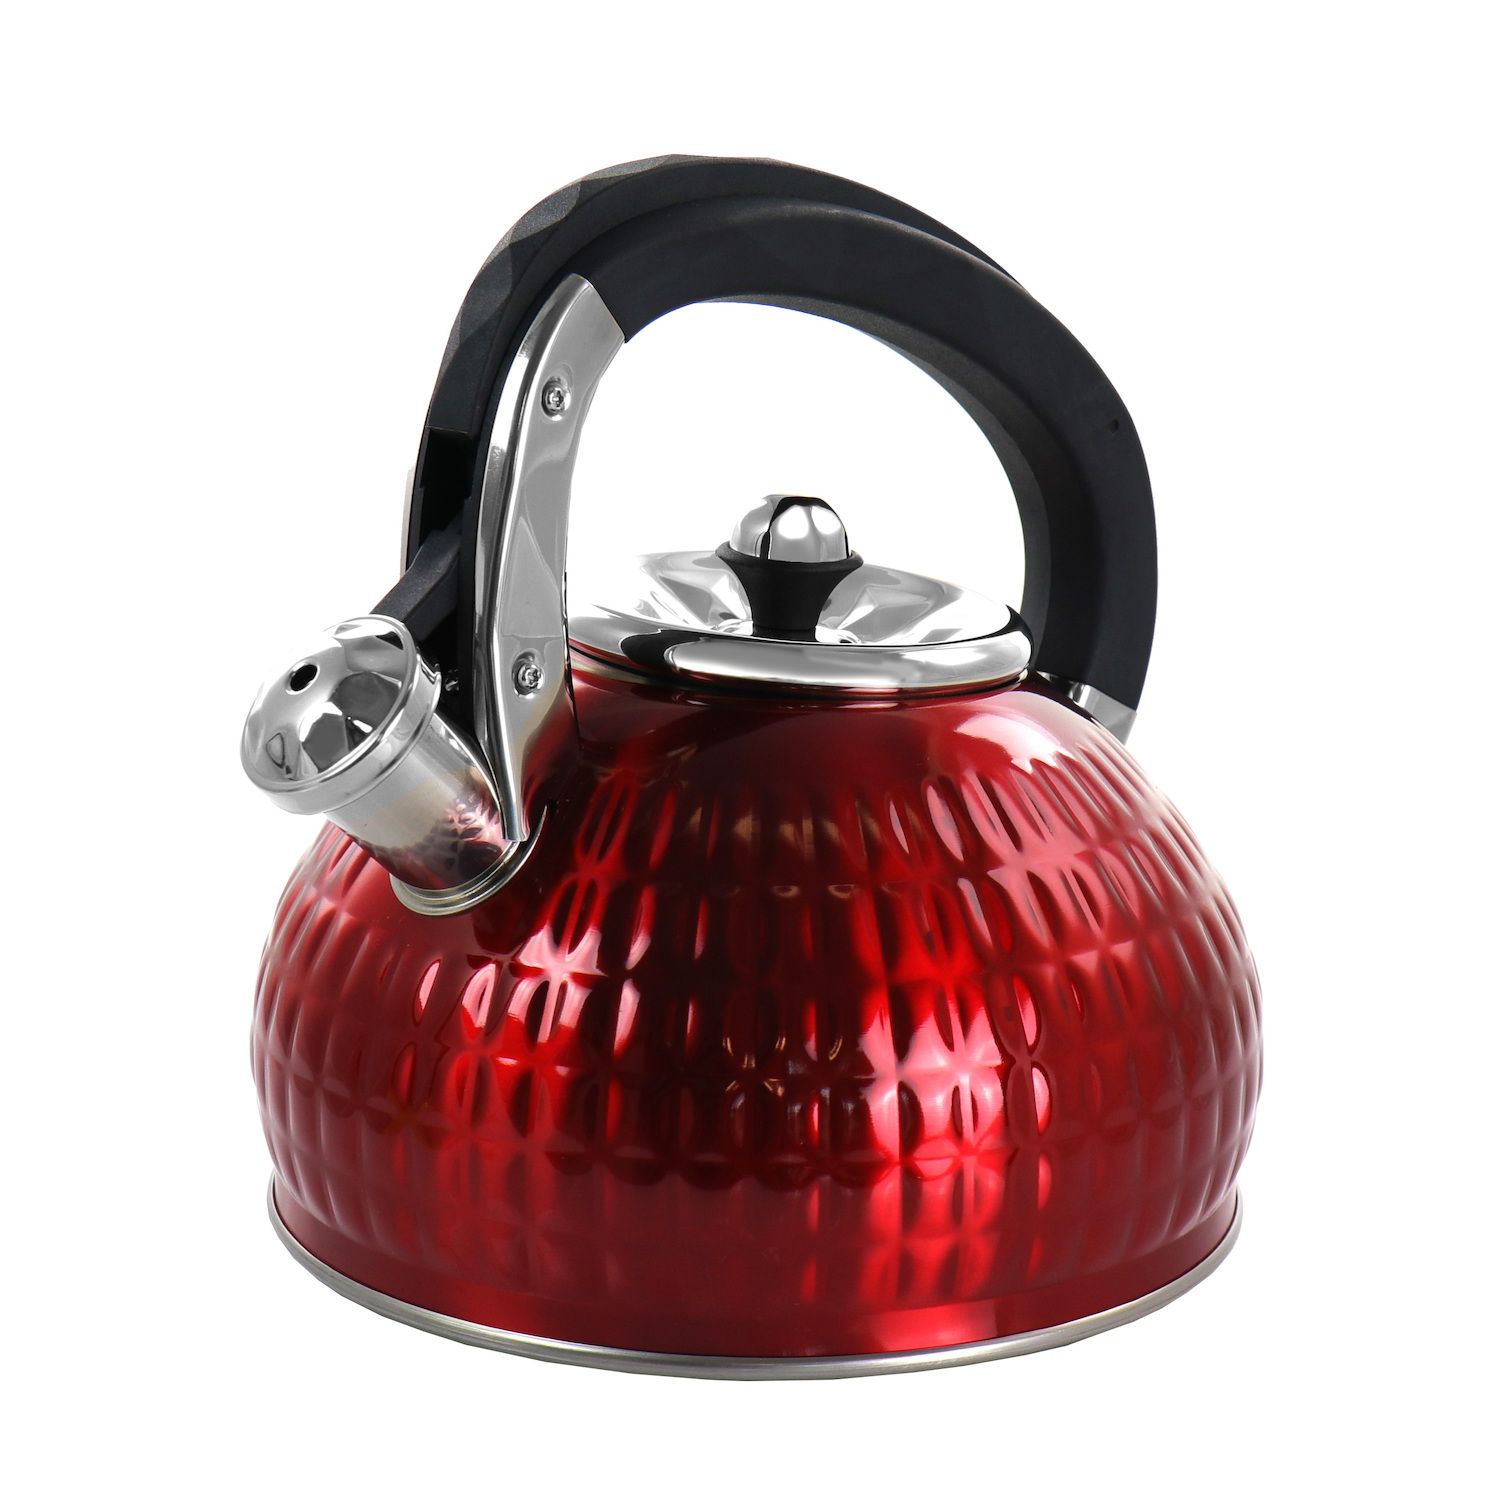 BARVIVO Whistling Tea Kettle - 3 Quart Large Size - Perfect Tea Pots for  Stove Top for Preparing Hot Water for Coffee or Tea - Stainless Steel Tea